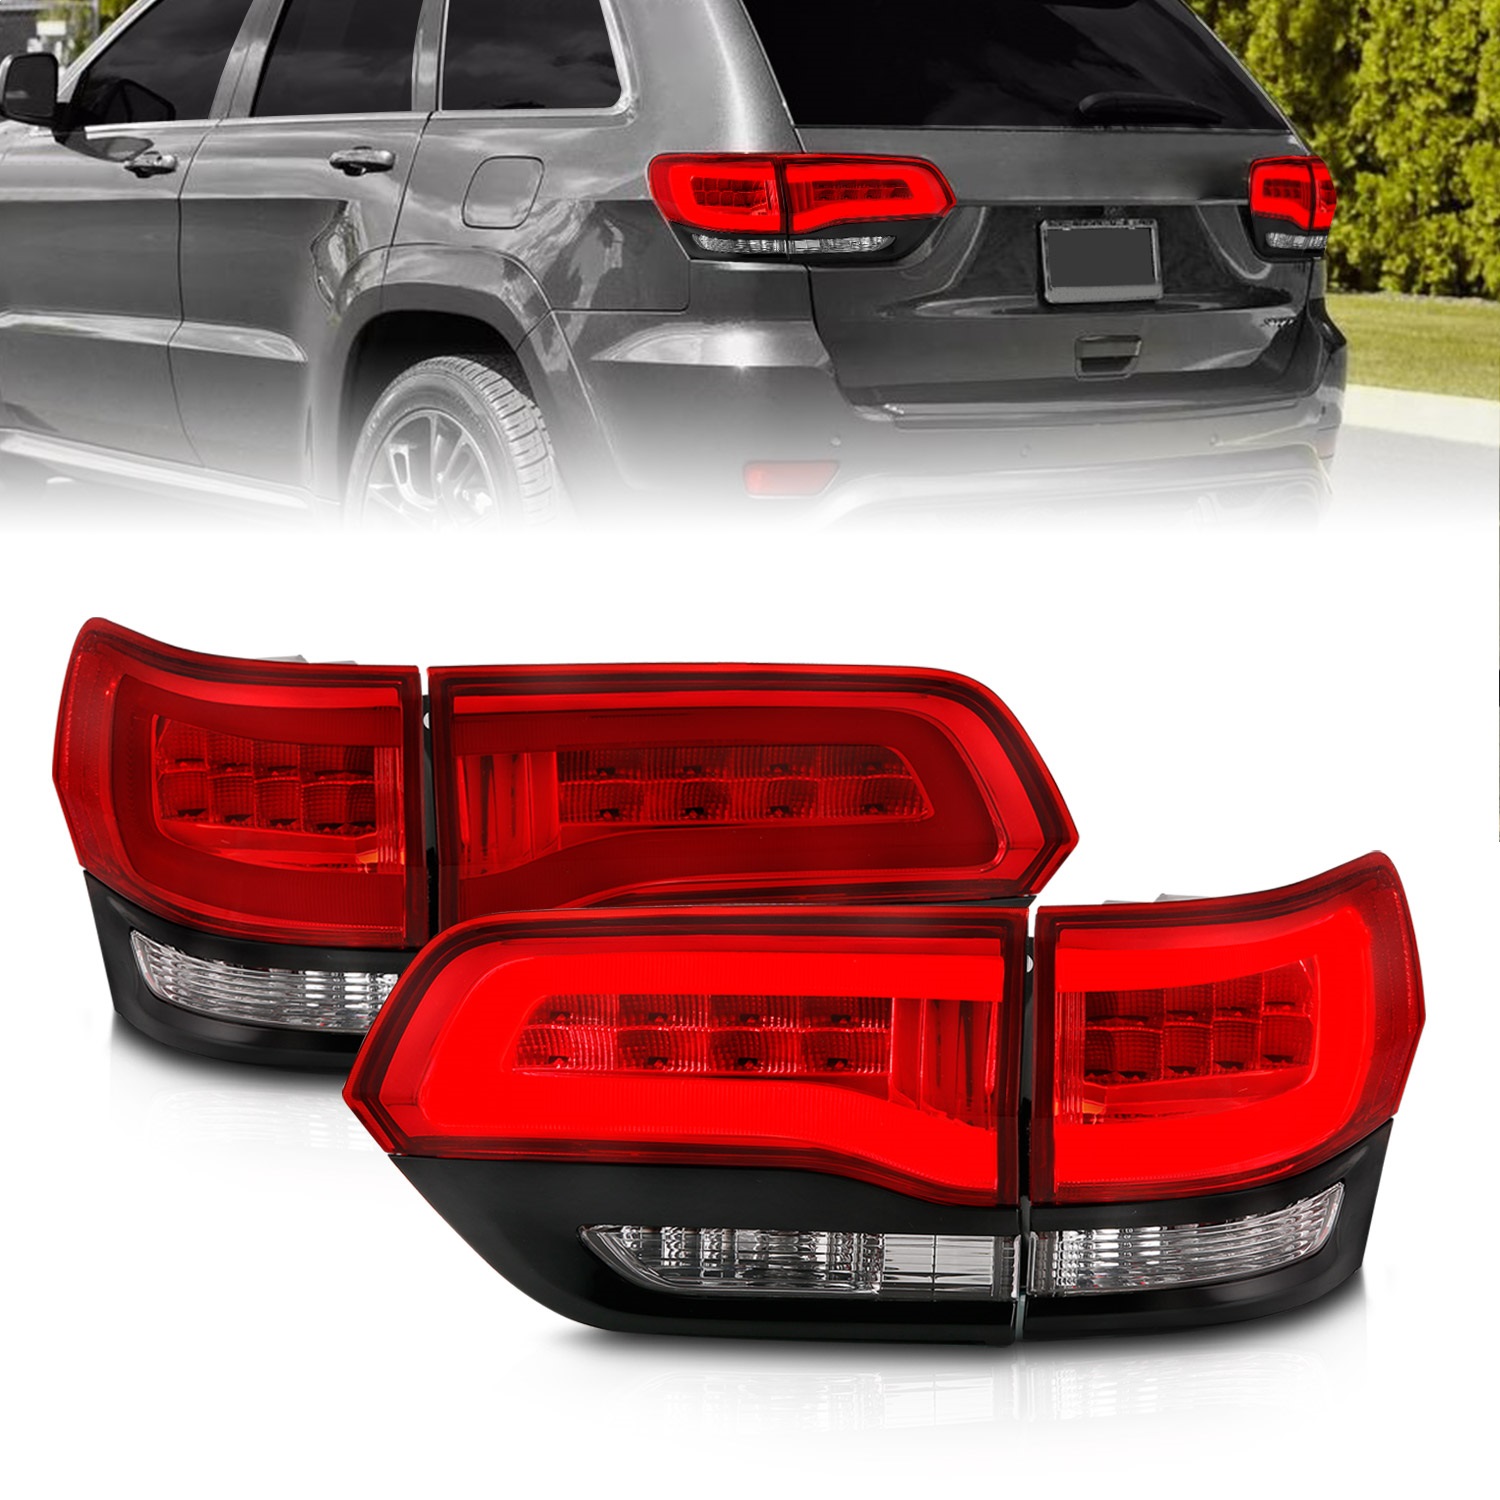 Anzo USA 311268 Tail Light Assembly Fits 14-17 Grand Cherokee (WK2)